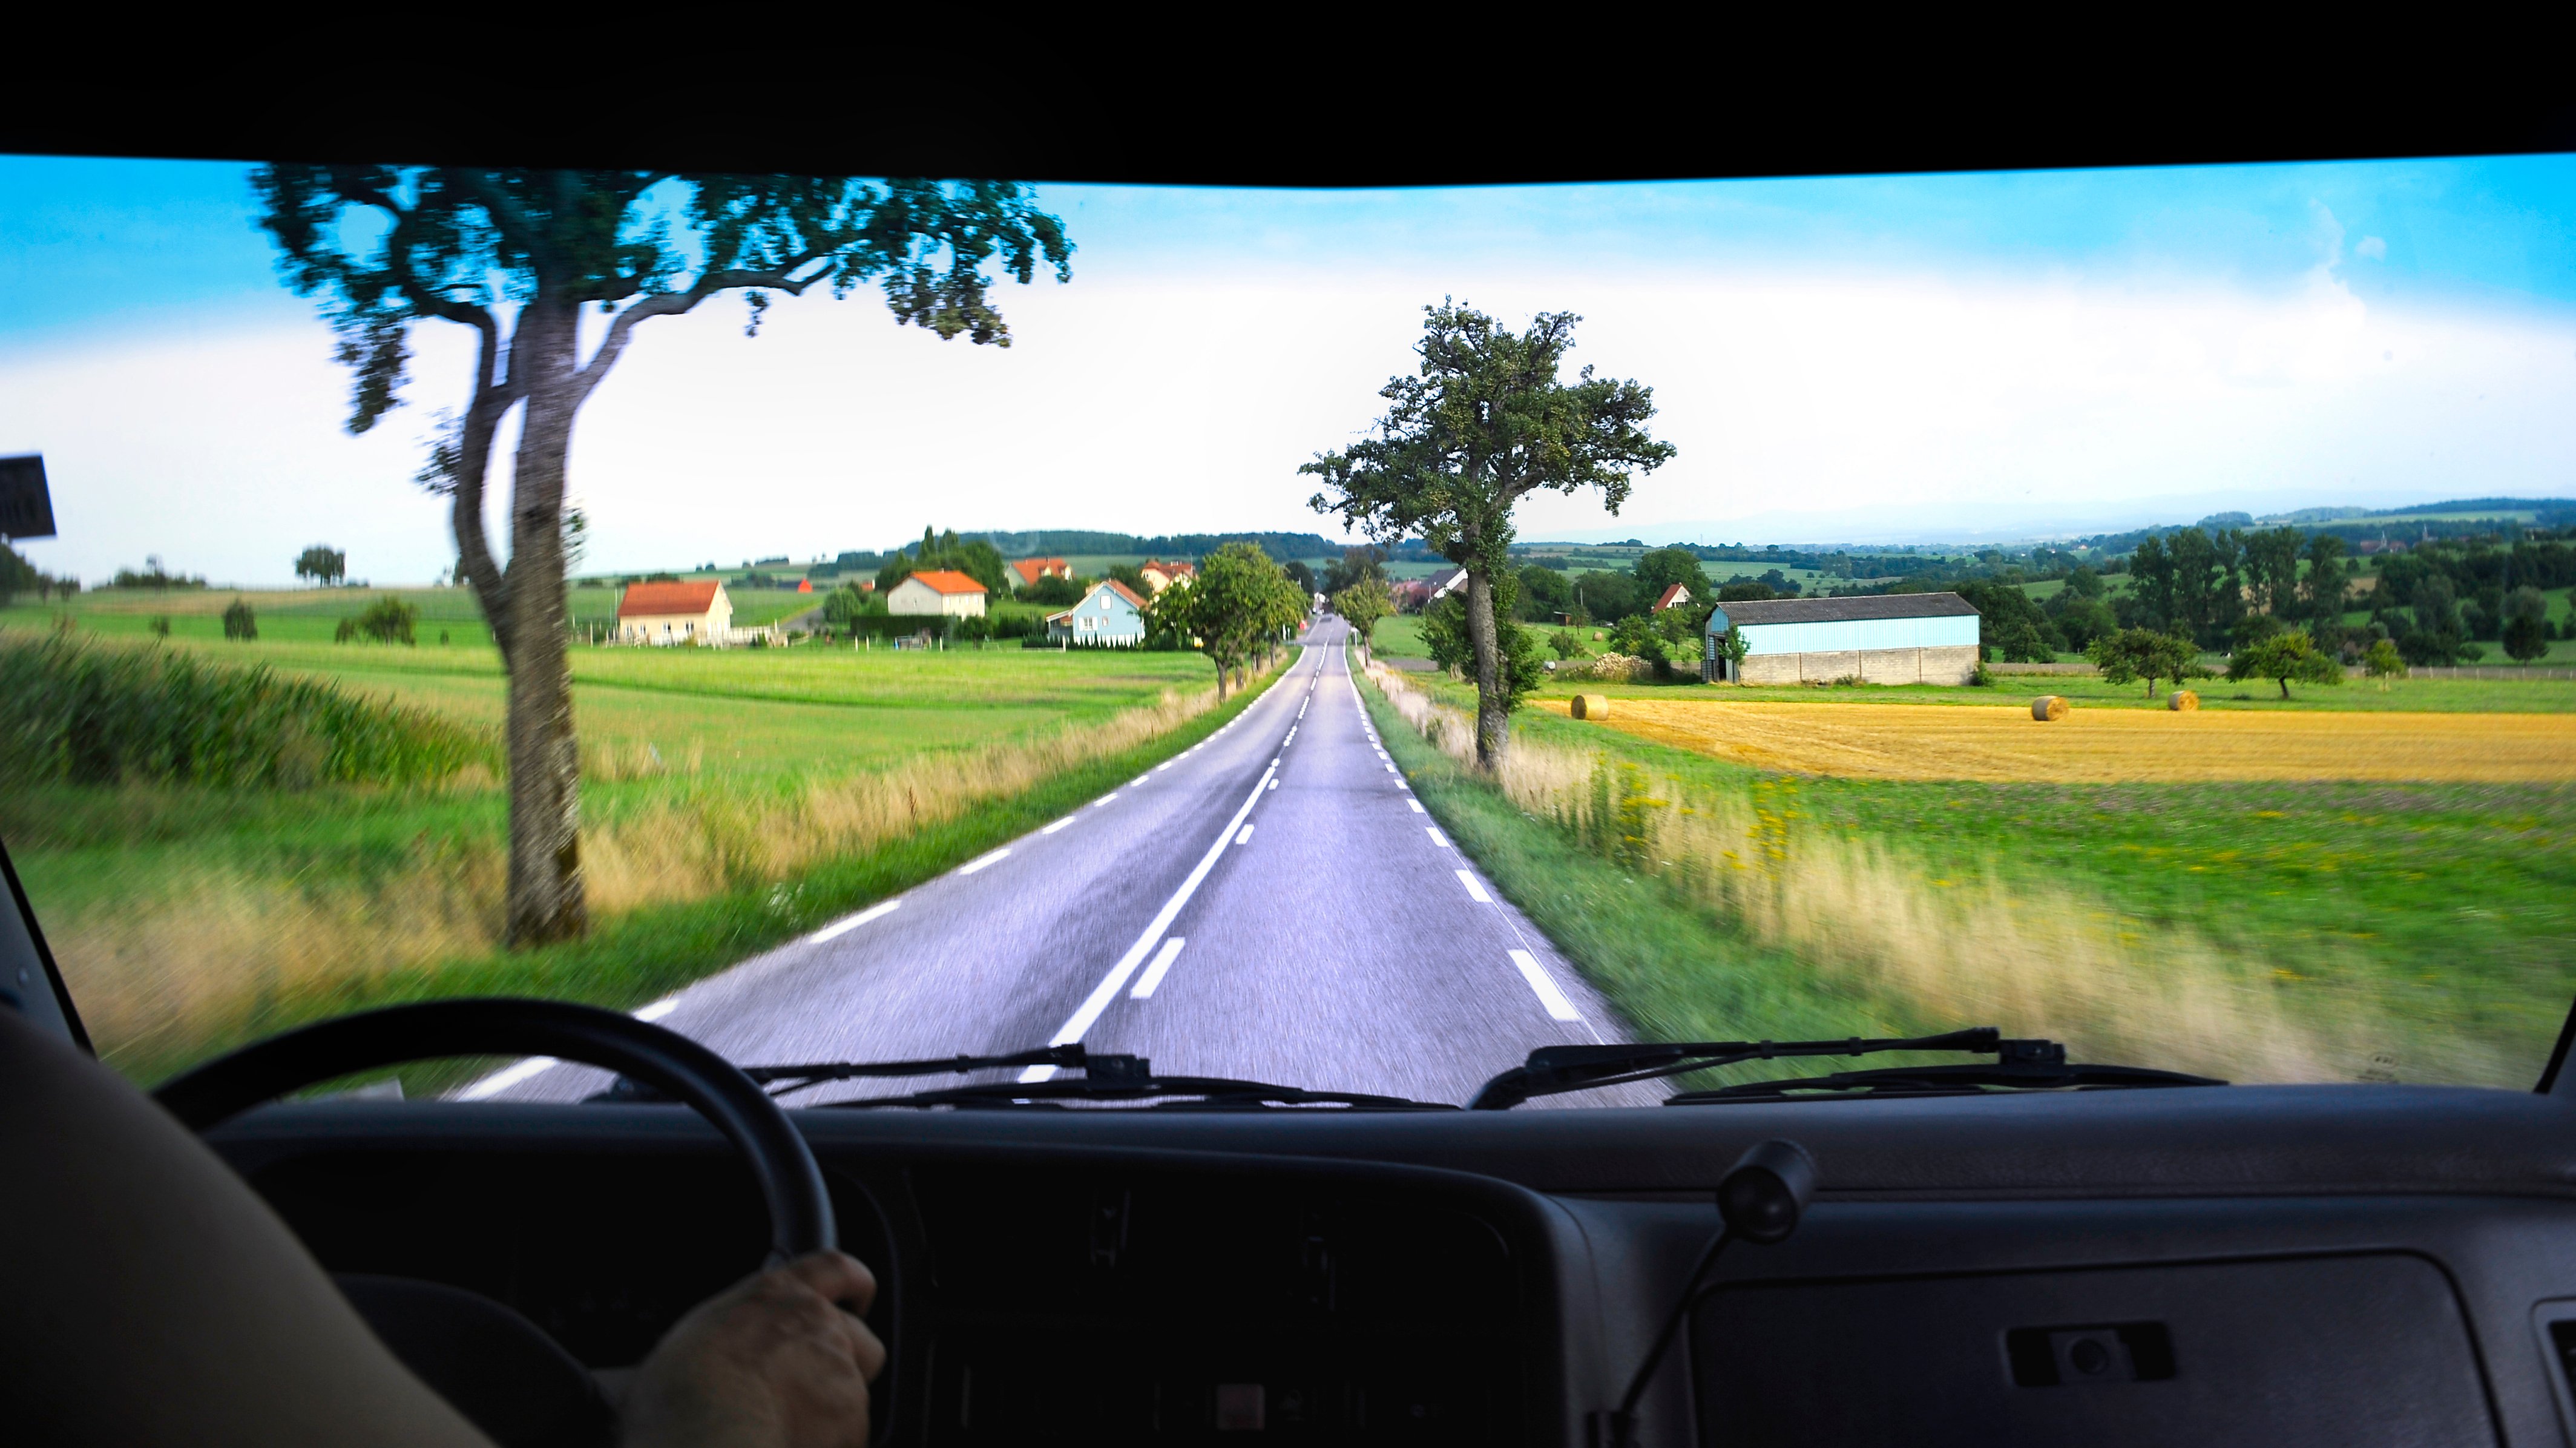 View of country road from inside an RV